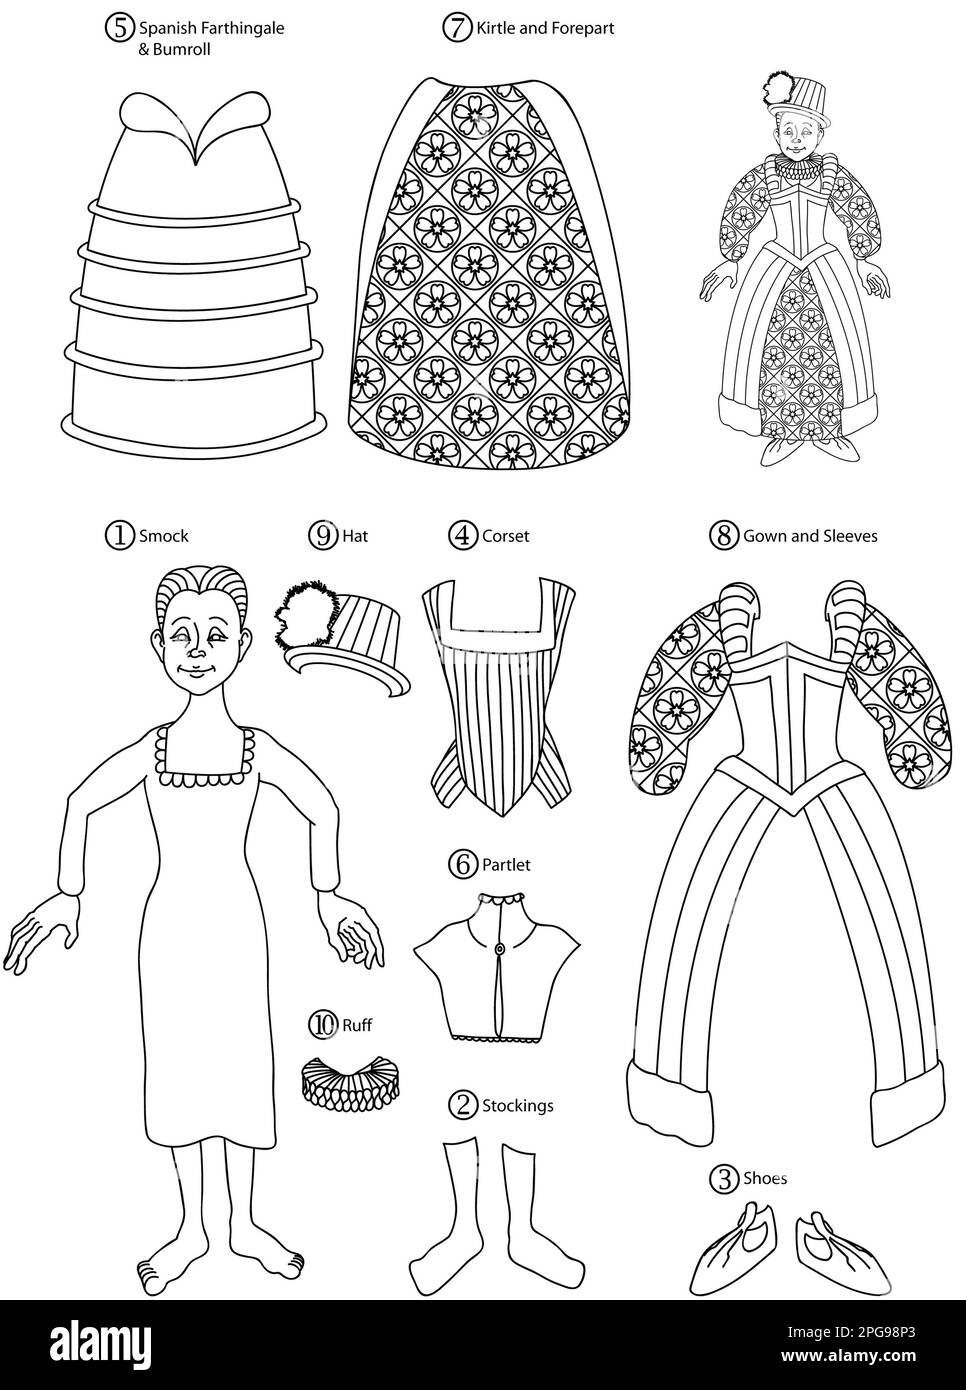 Art / illustration for educational / play / school activity sheet of an Elizabethan cut out paper doll & historic clothes, woman's cut-out & dress-up. Stock Photo